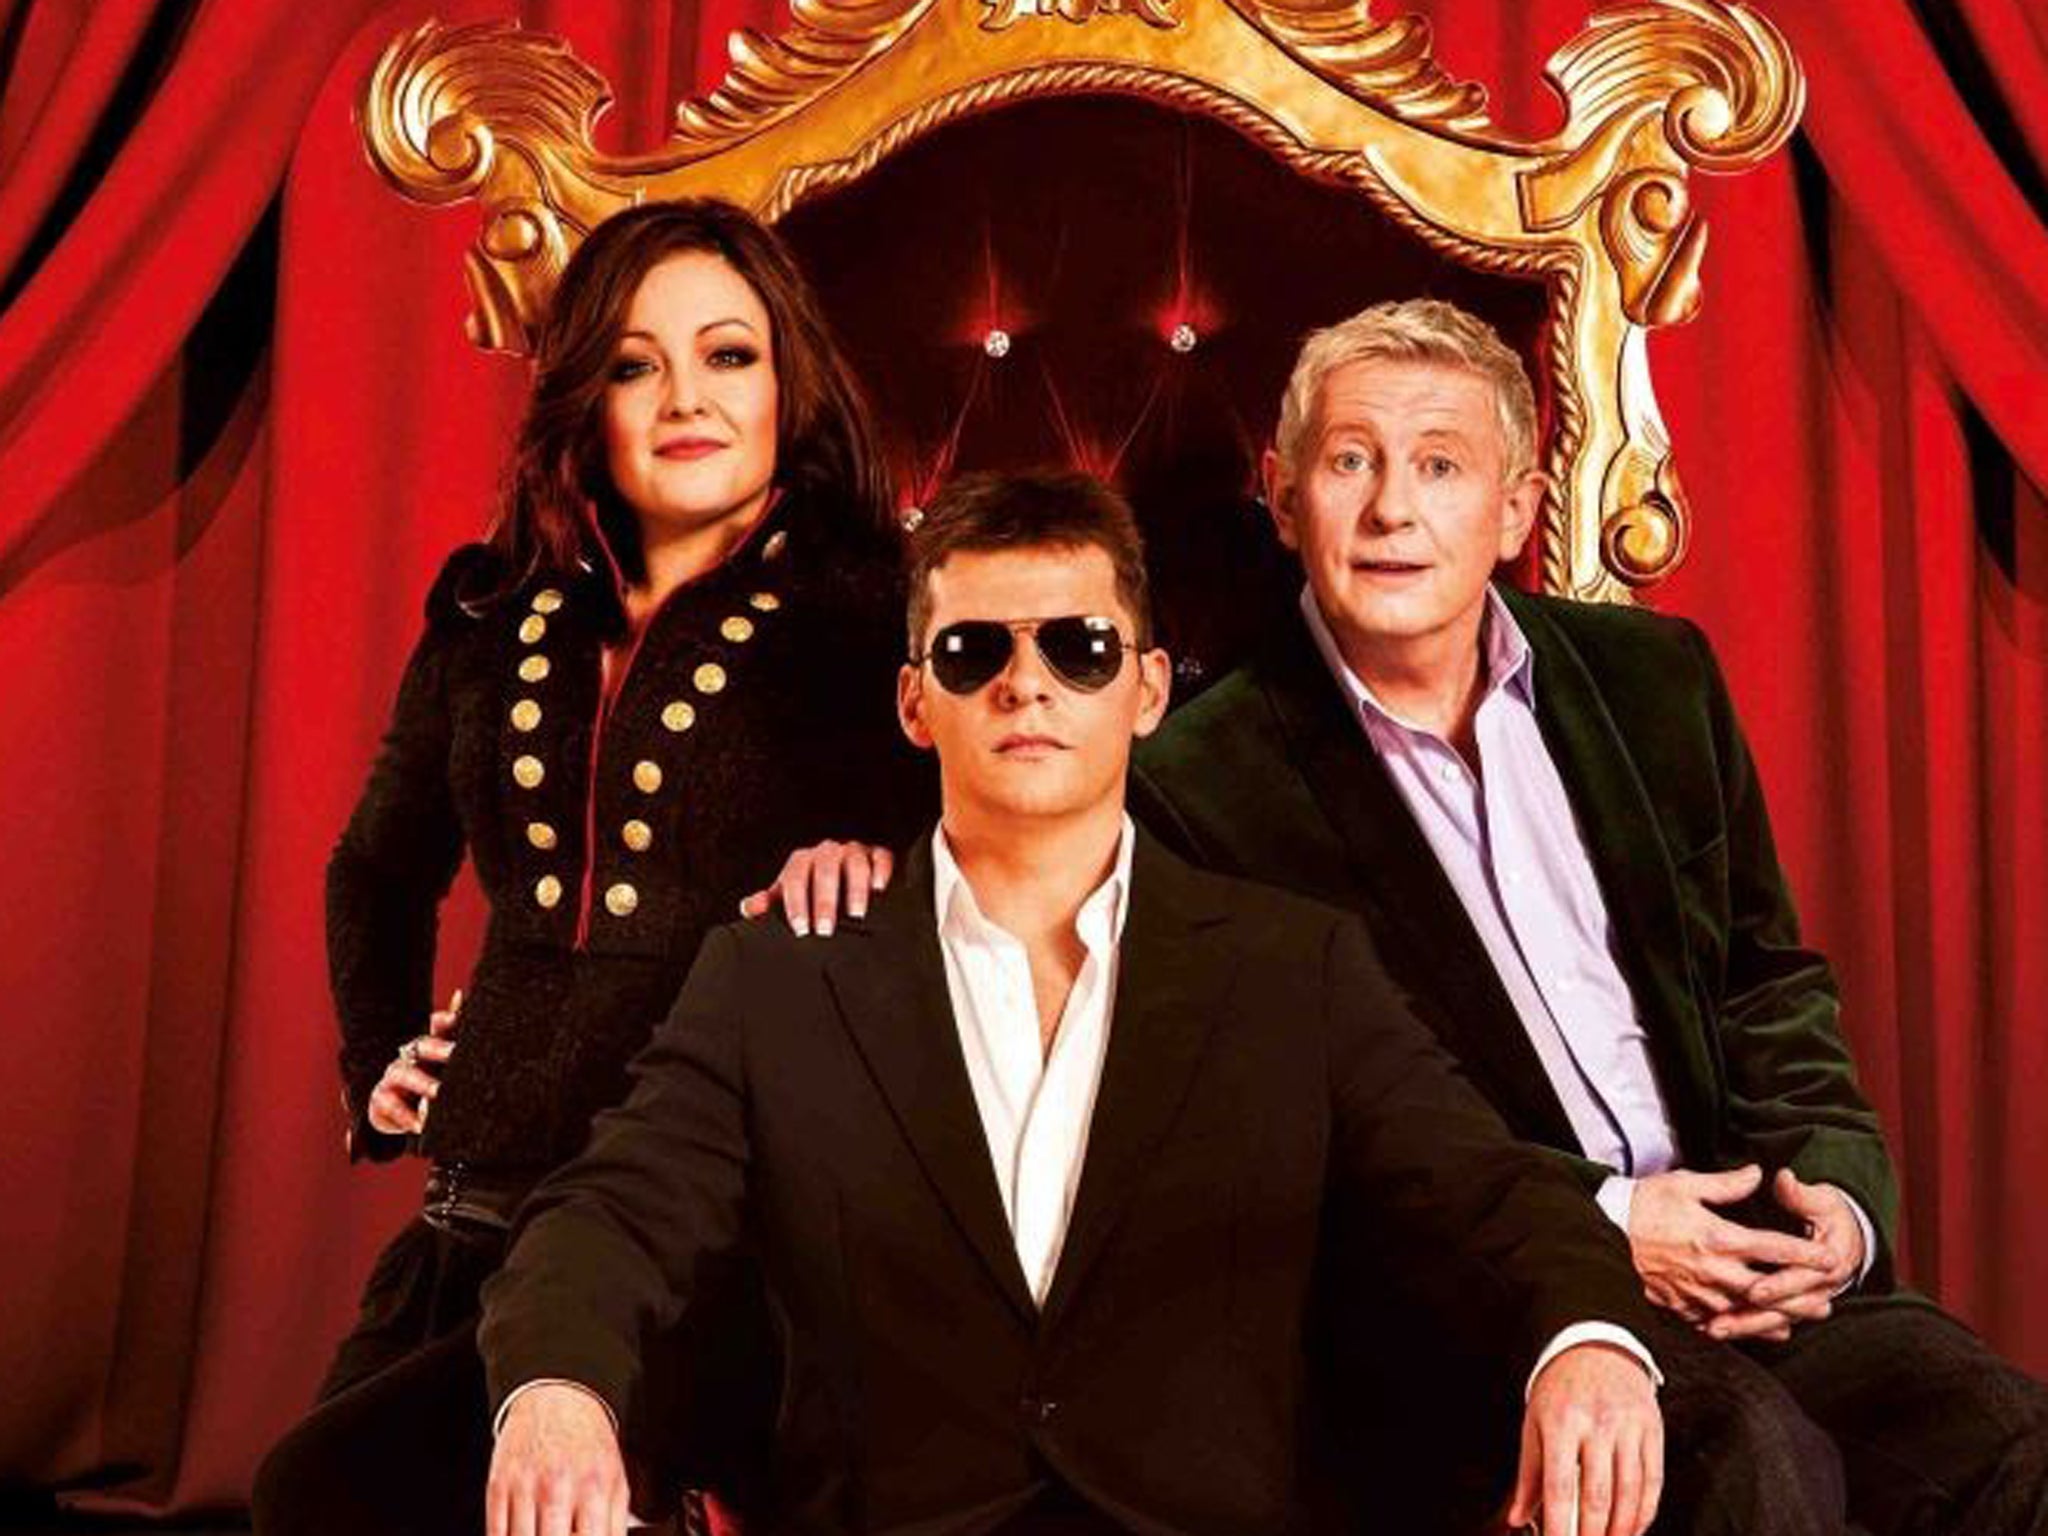 I Can't Sing! stars former EastEnders actor Nigel Harman (centre) as a character inspired by Simon Cowell